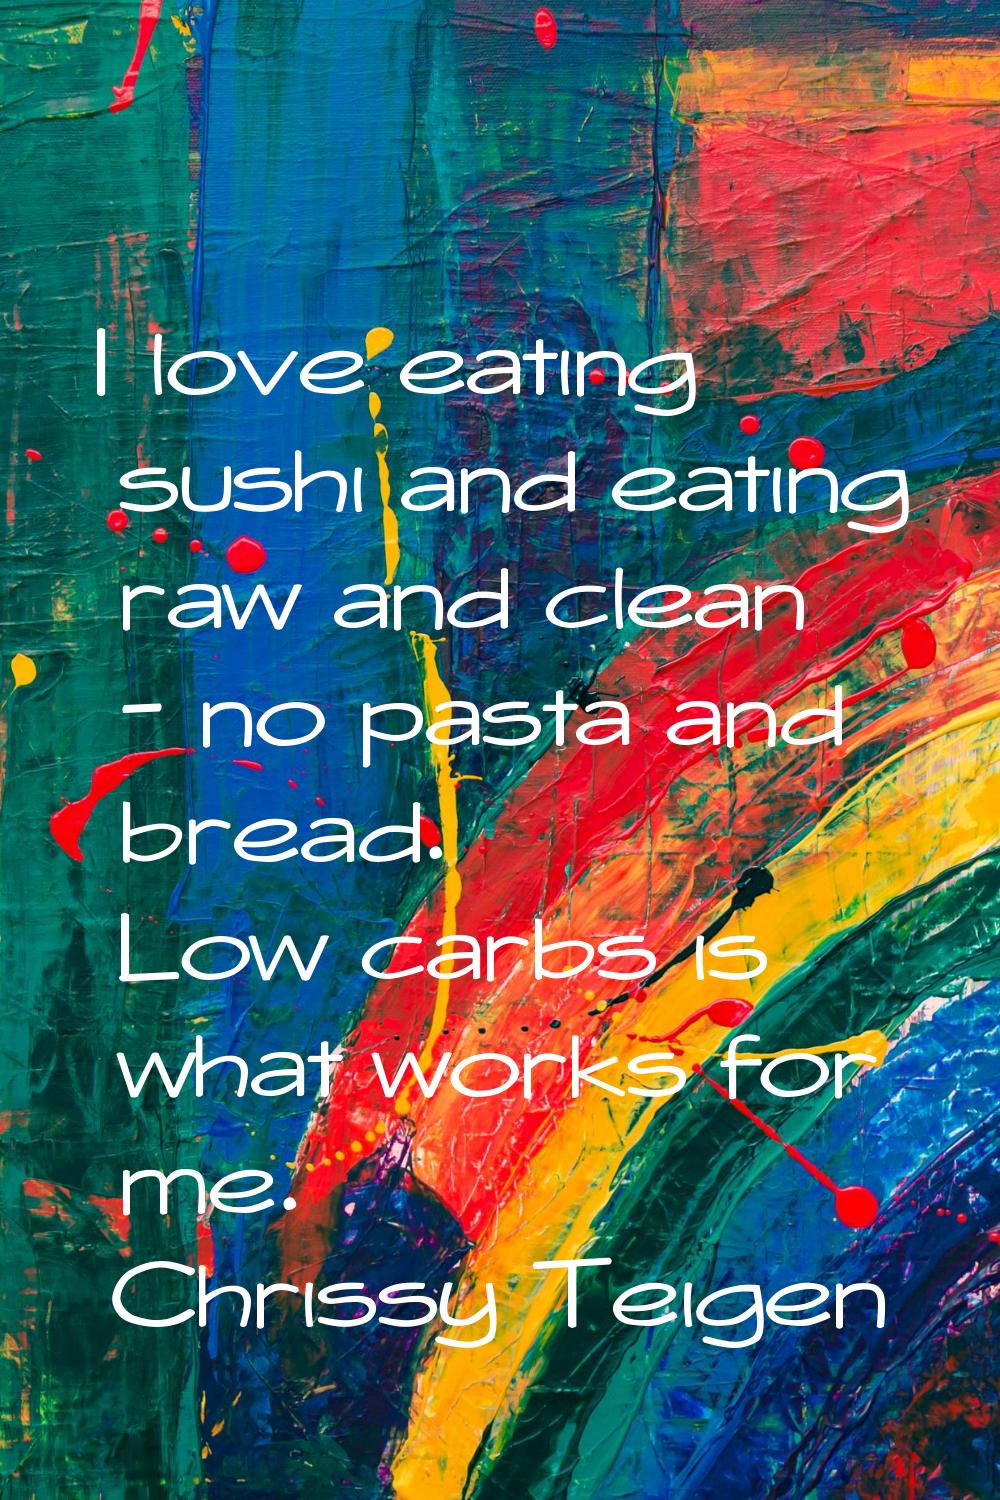 I love eating sushi and eating raw and clean - no pasta and bread. Low carbs is what works for me.